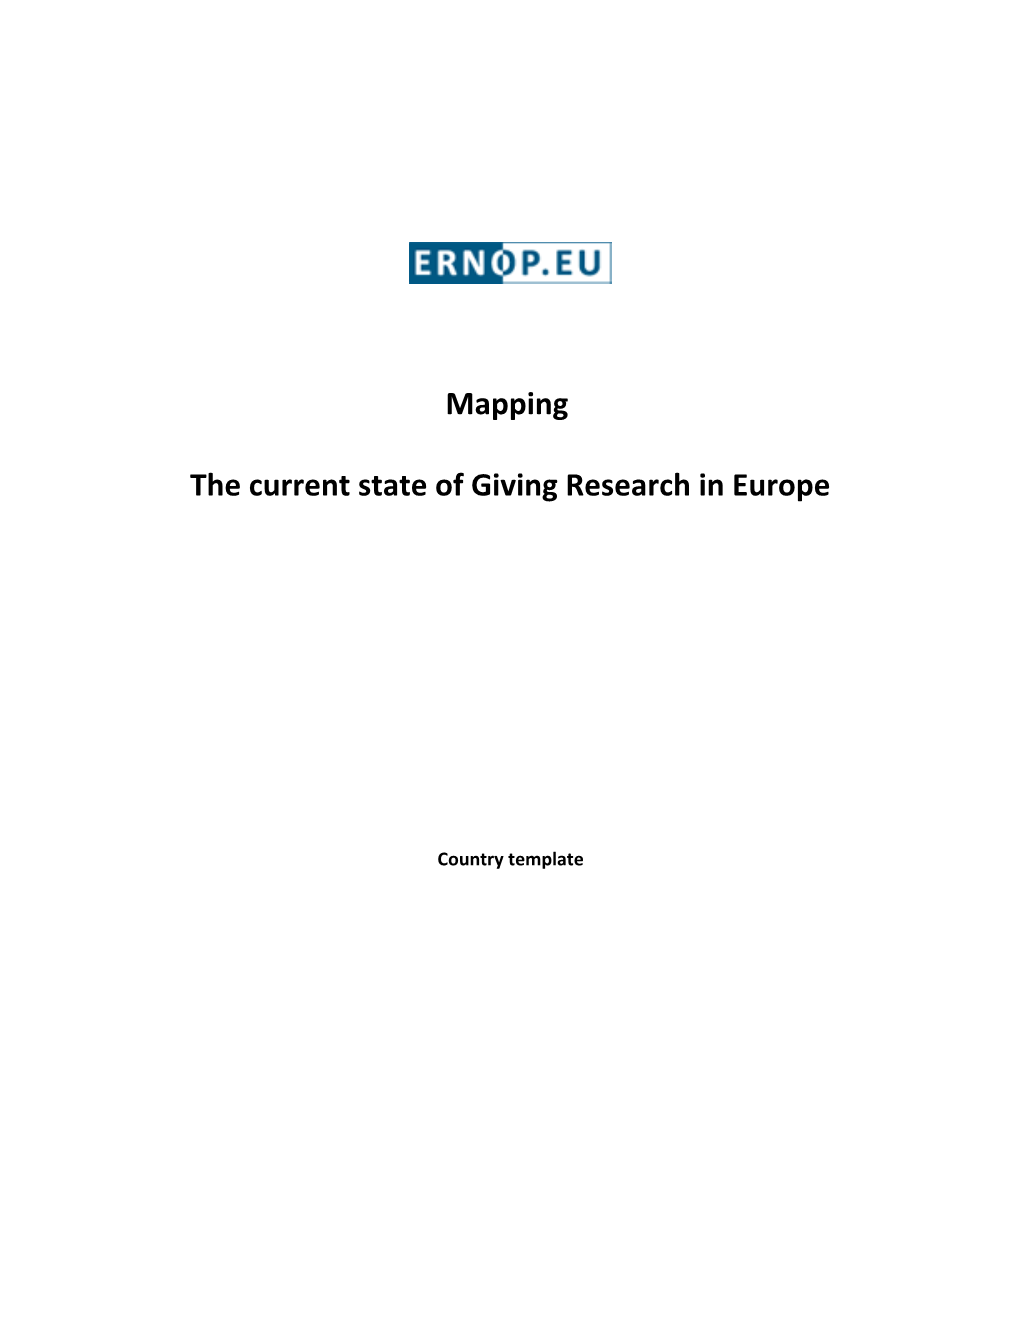 The Current State of Giving Research in Europe